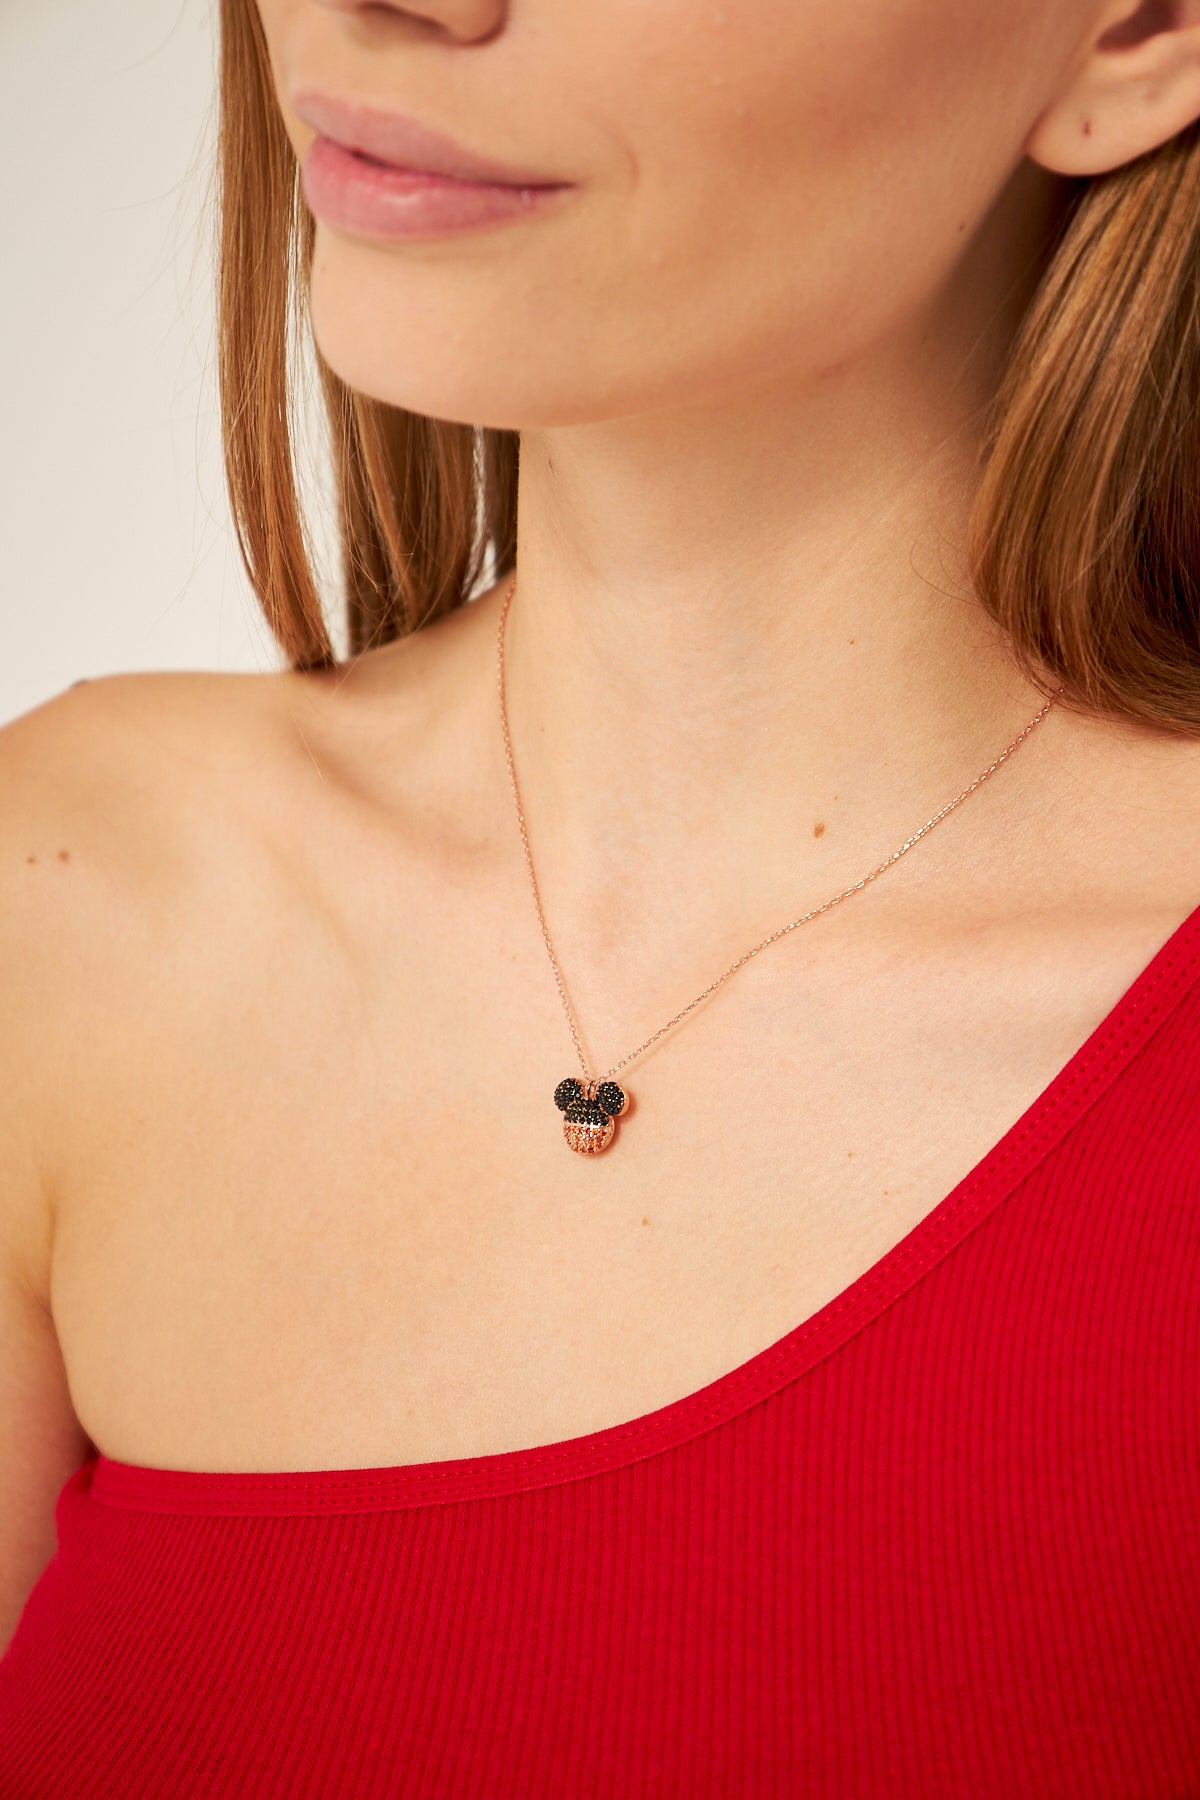 Mickey and Minnie Mouse Charm Necklace | Minnie, Mickey, Charm necklace